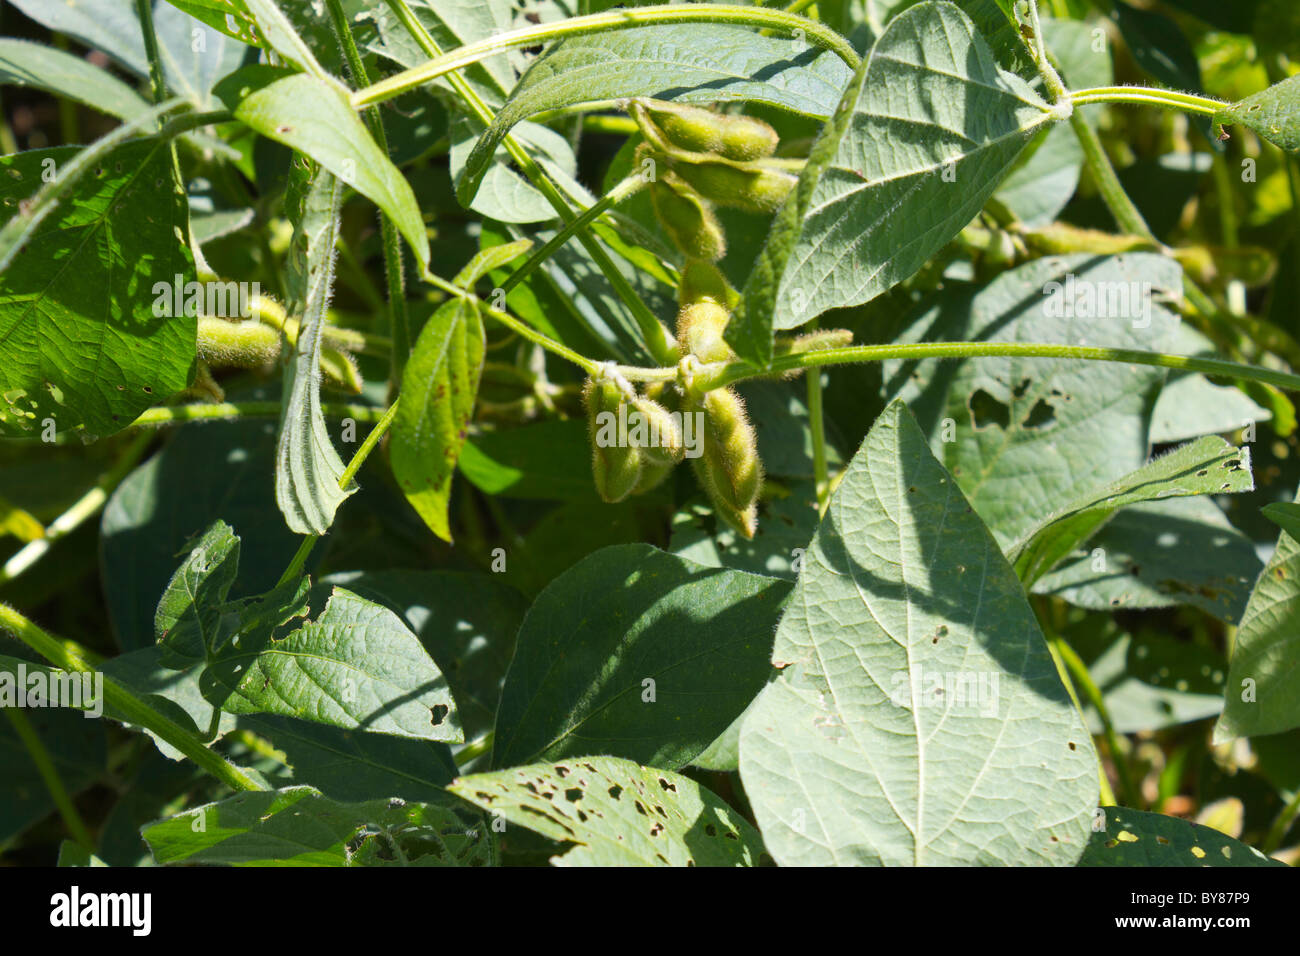 pods, stems, and leaves of soybean or soya bean cultivation, USA Stock Photo